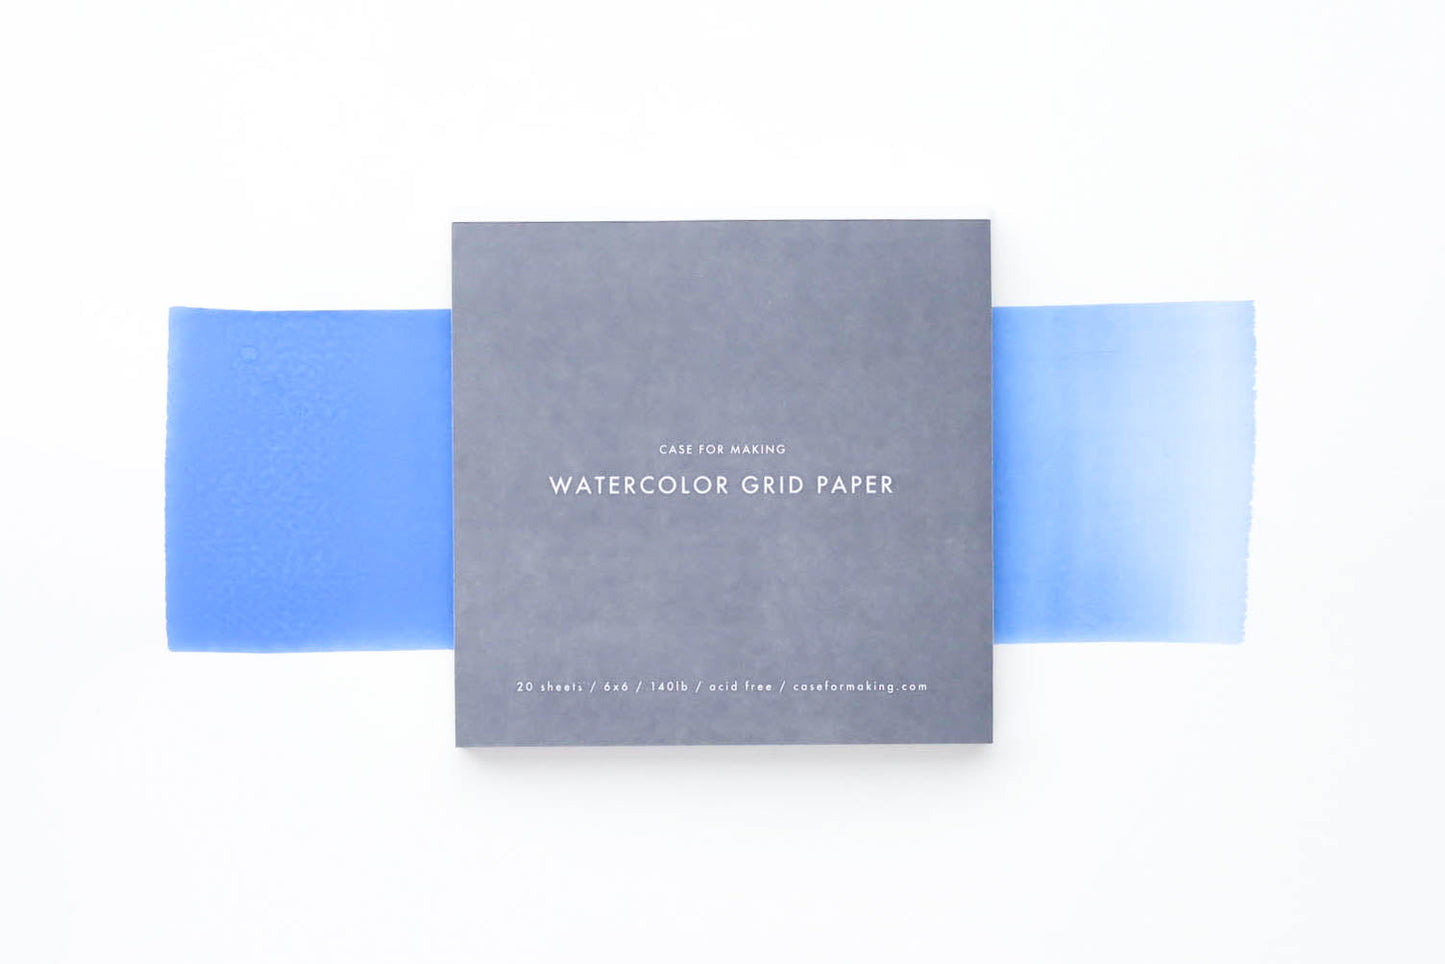 The closed, top-bound 6" x 6" Watercolor Grid Paper pad.  Showing the soft grey cover with white lettering. 